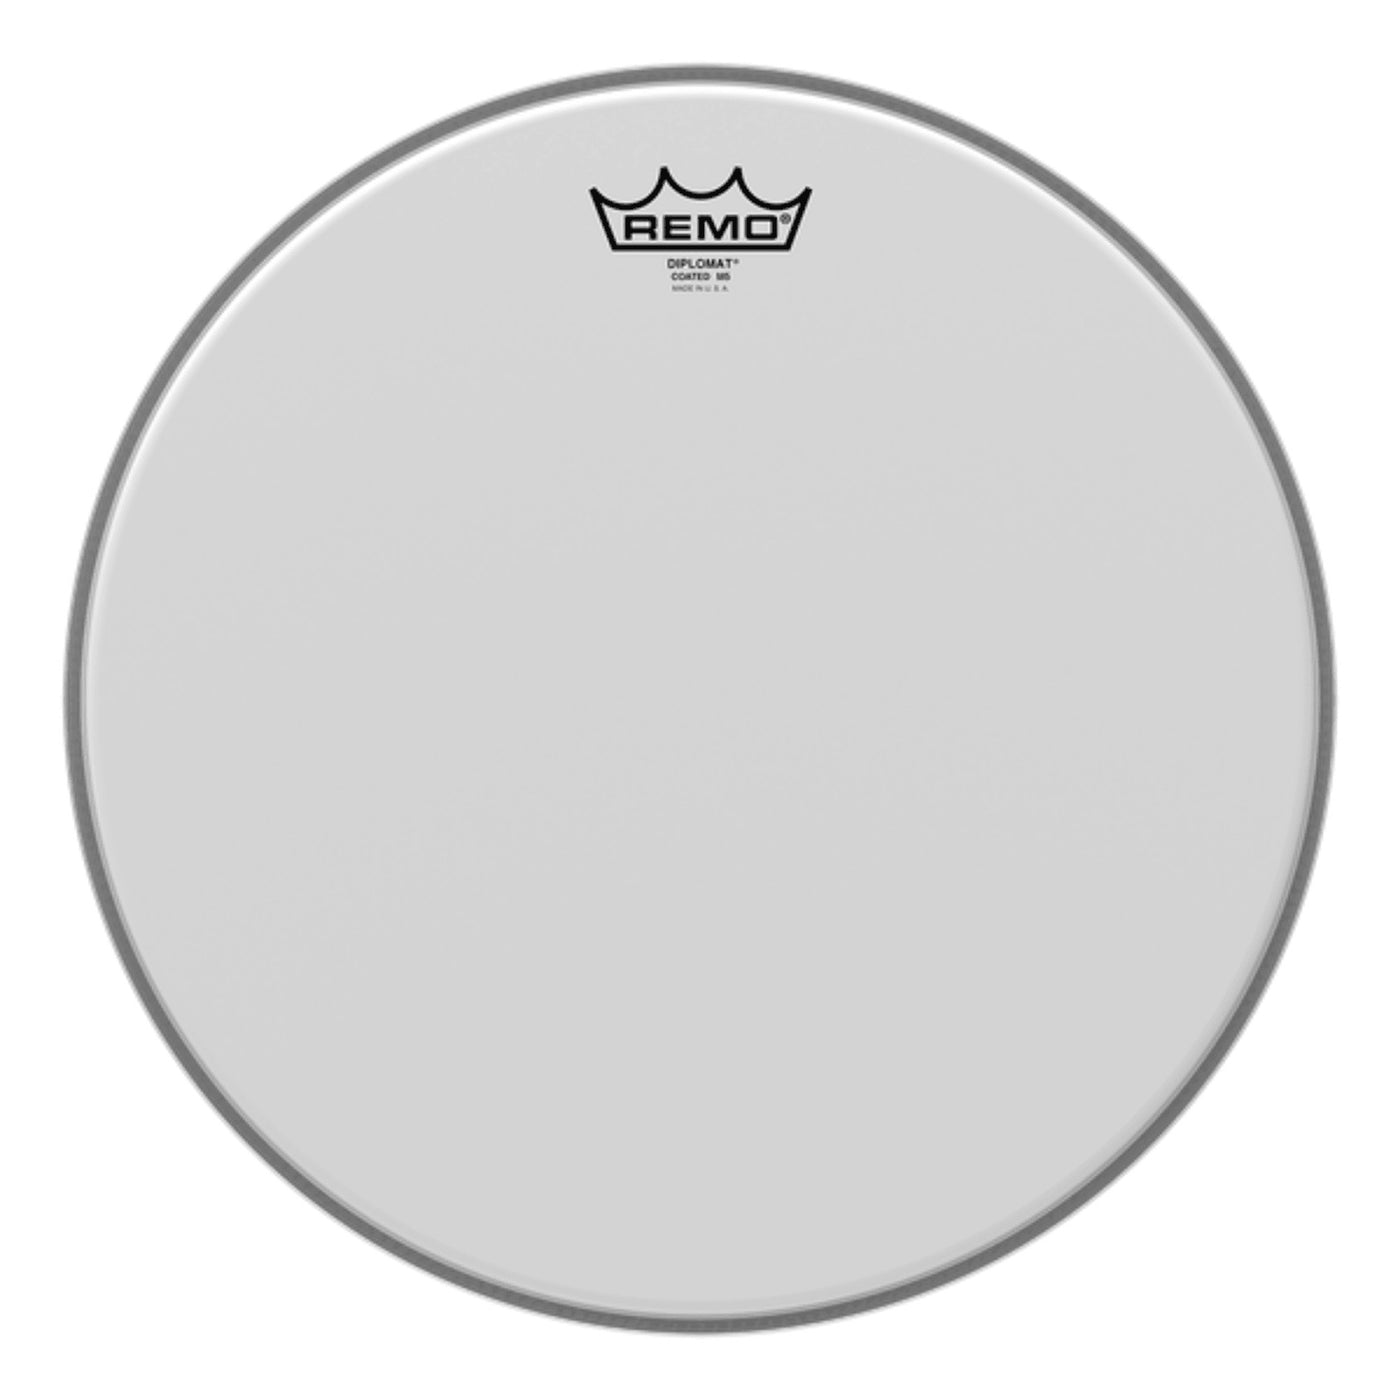 Remo M5-0114-00 14" Diplomat Coated M5 Thin Concert Snare Drum Head